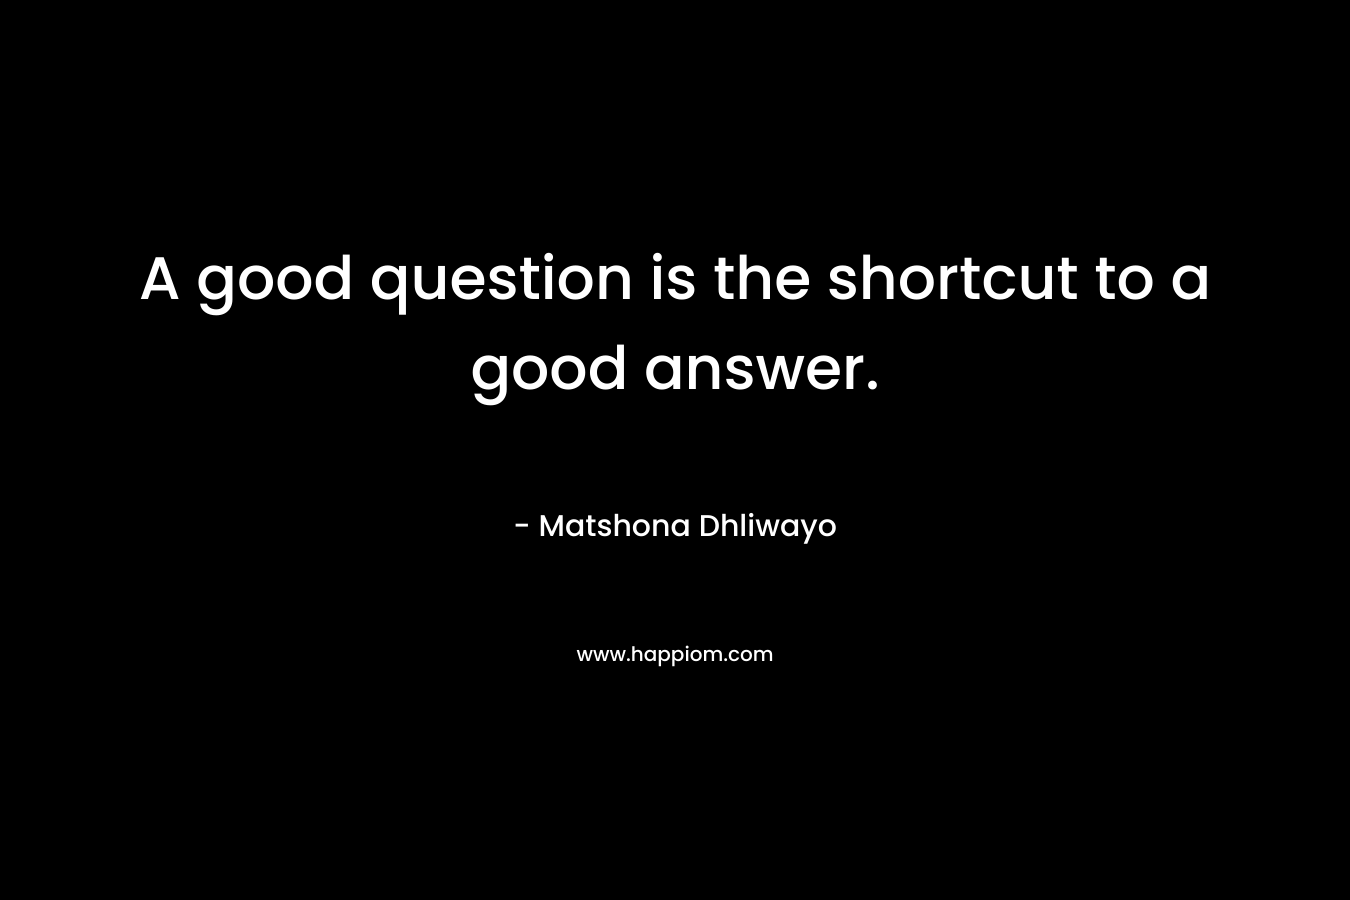 A good question is the shortcut to a good answer.